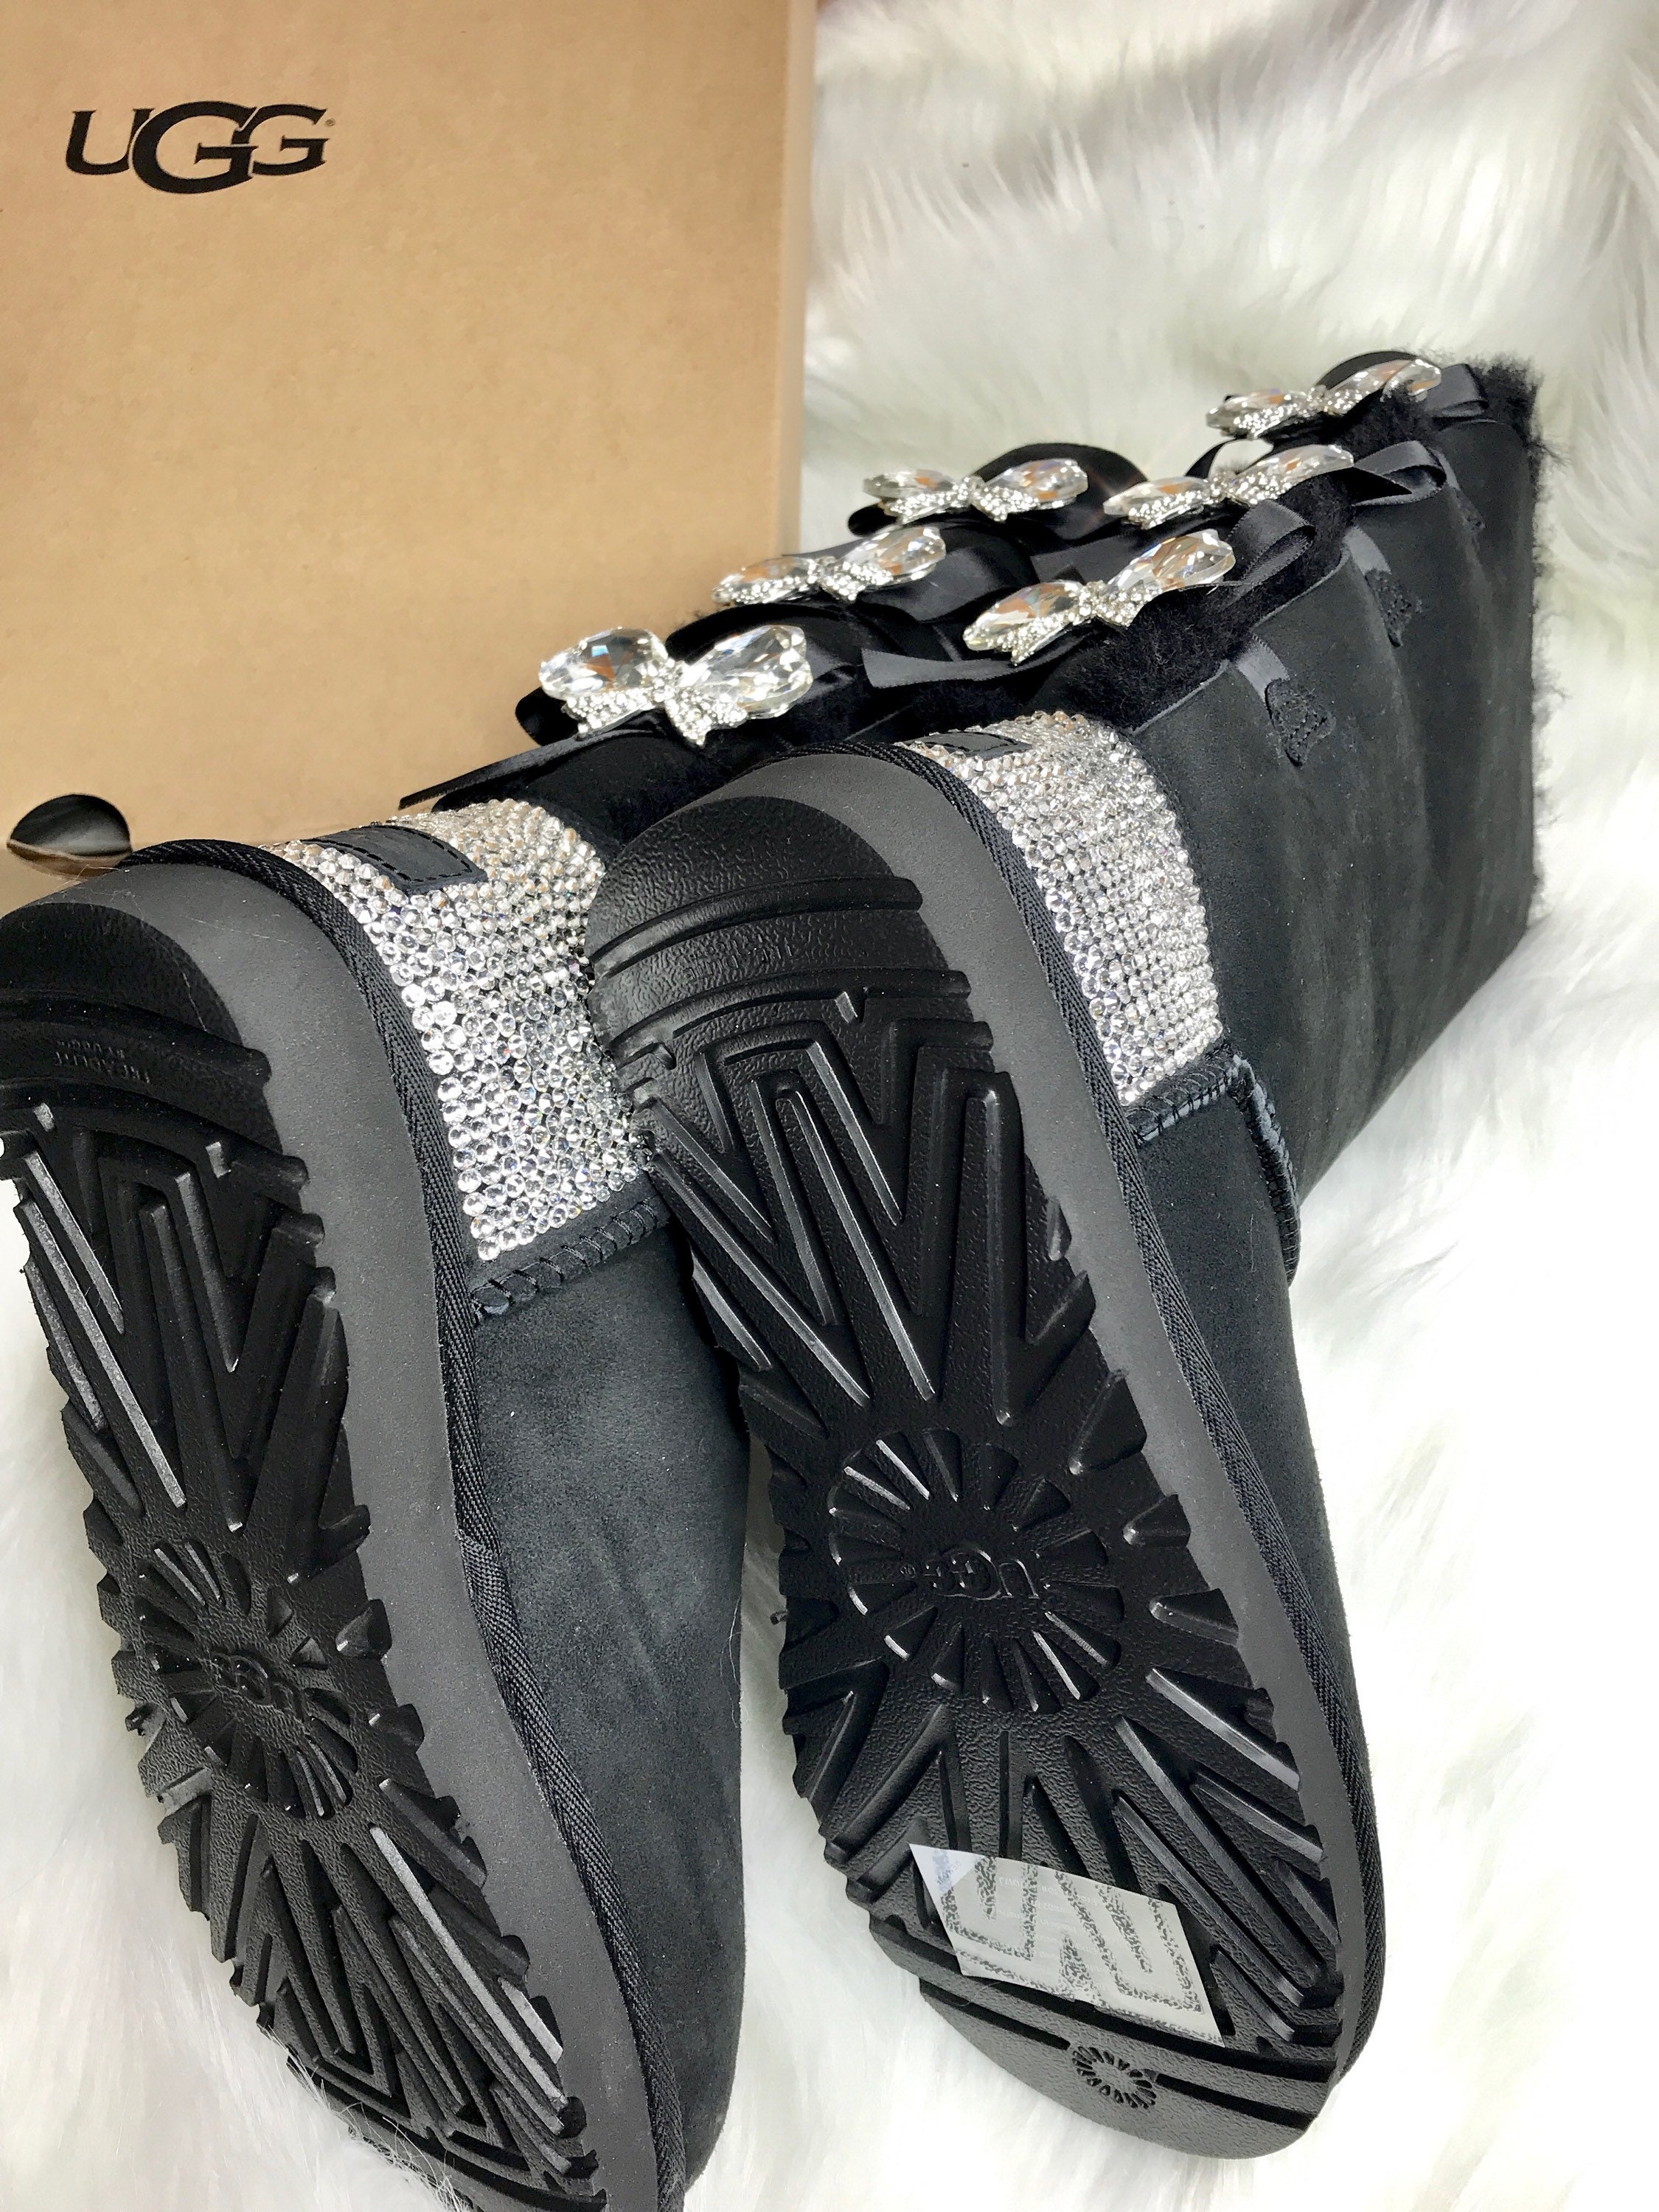 Ugg Boots customized with Swarovski Crystals.